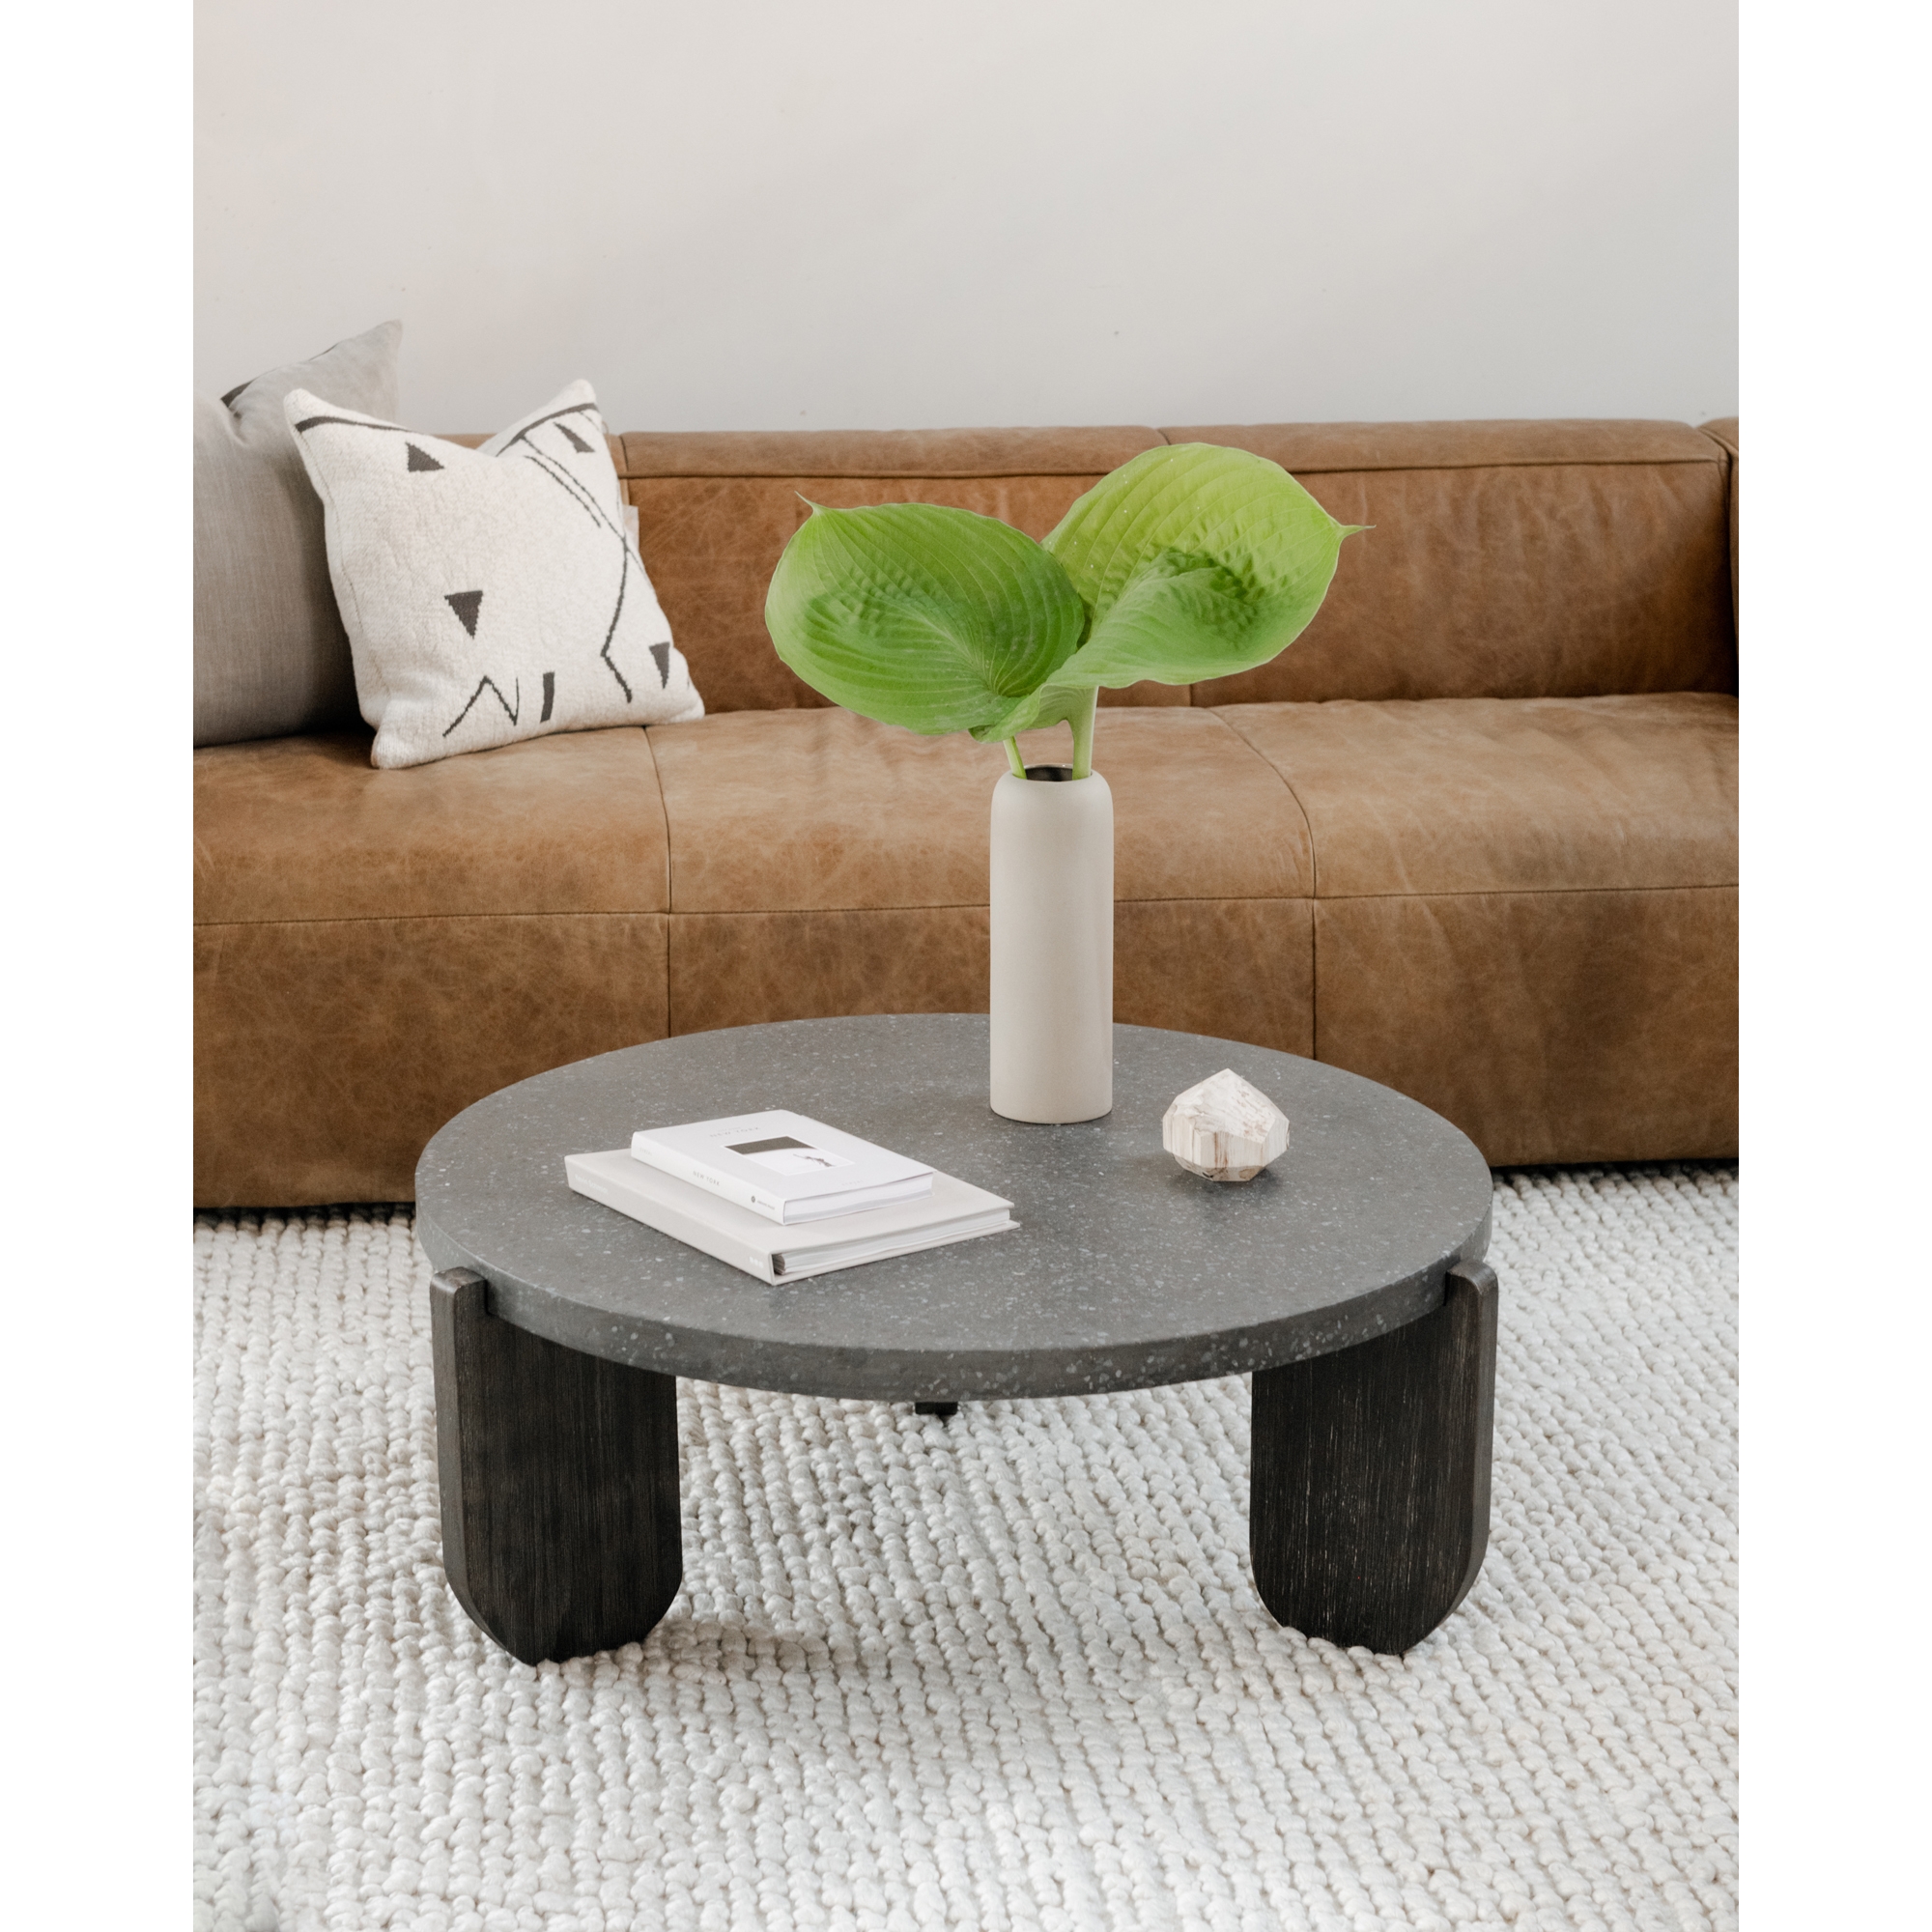 WUNDER COFFEE TABLE - Image 5